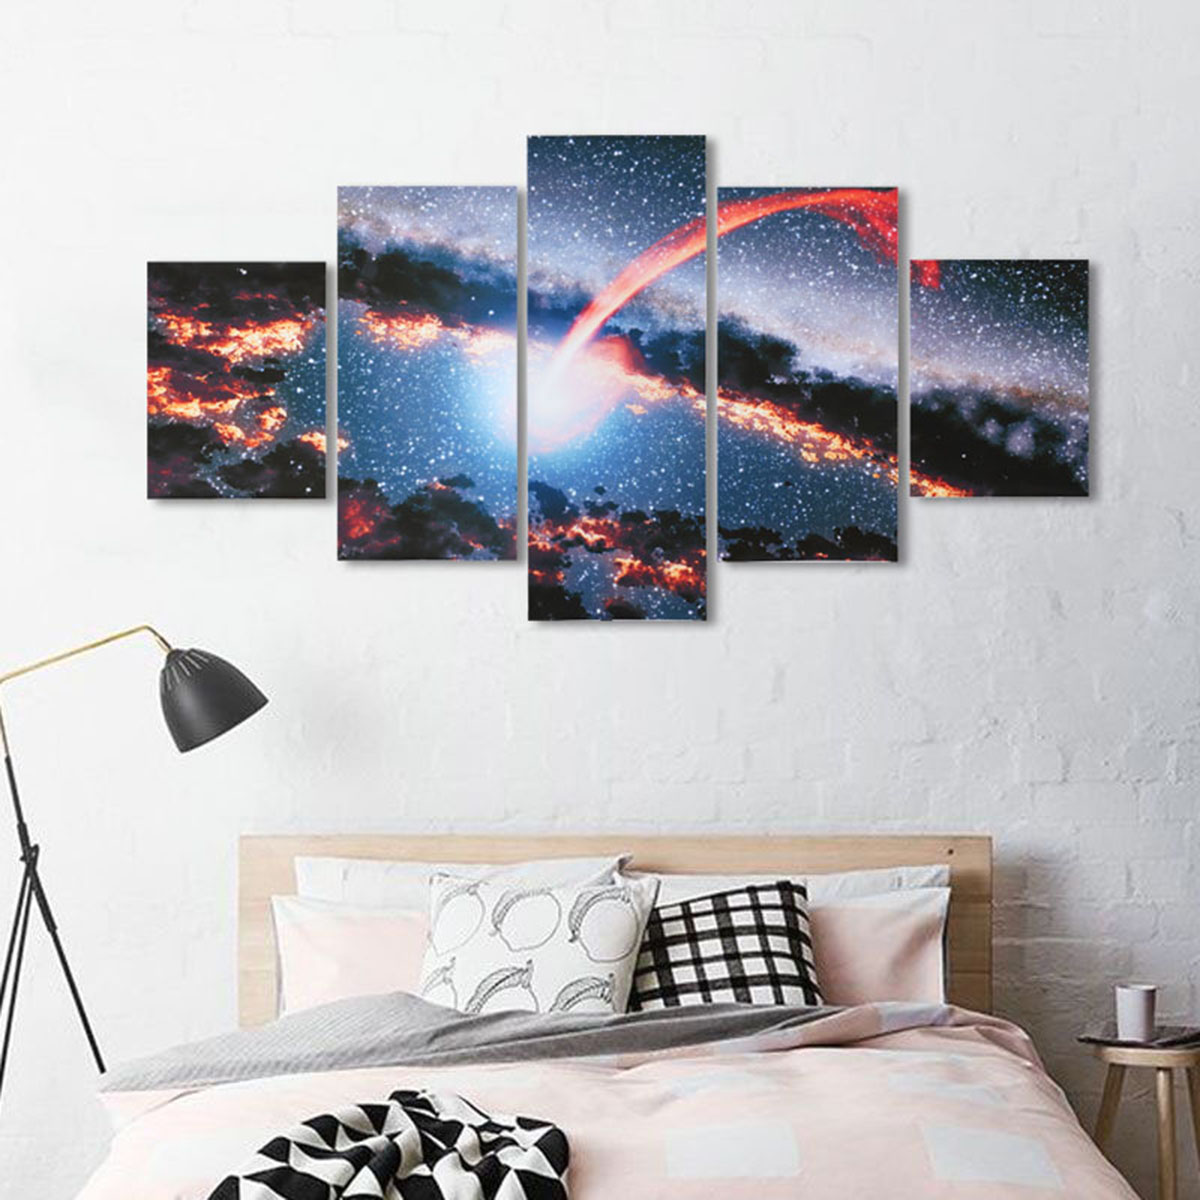 5Pcs-Canvas-Painting-Starry-Sky-Wall-Decorative-Print-Art-Pictures-Frameless-Wall-Hanging-Home-Offic-1803048-3